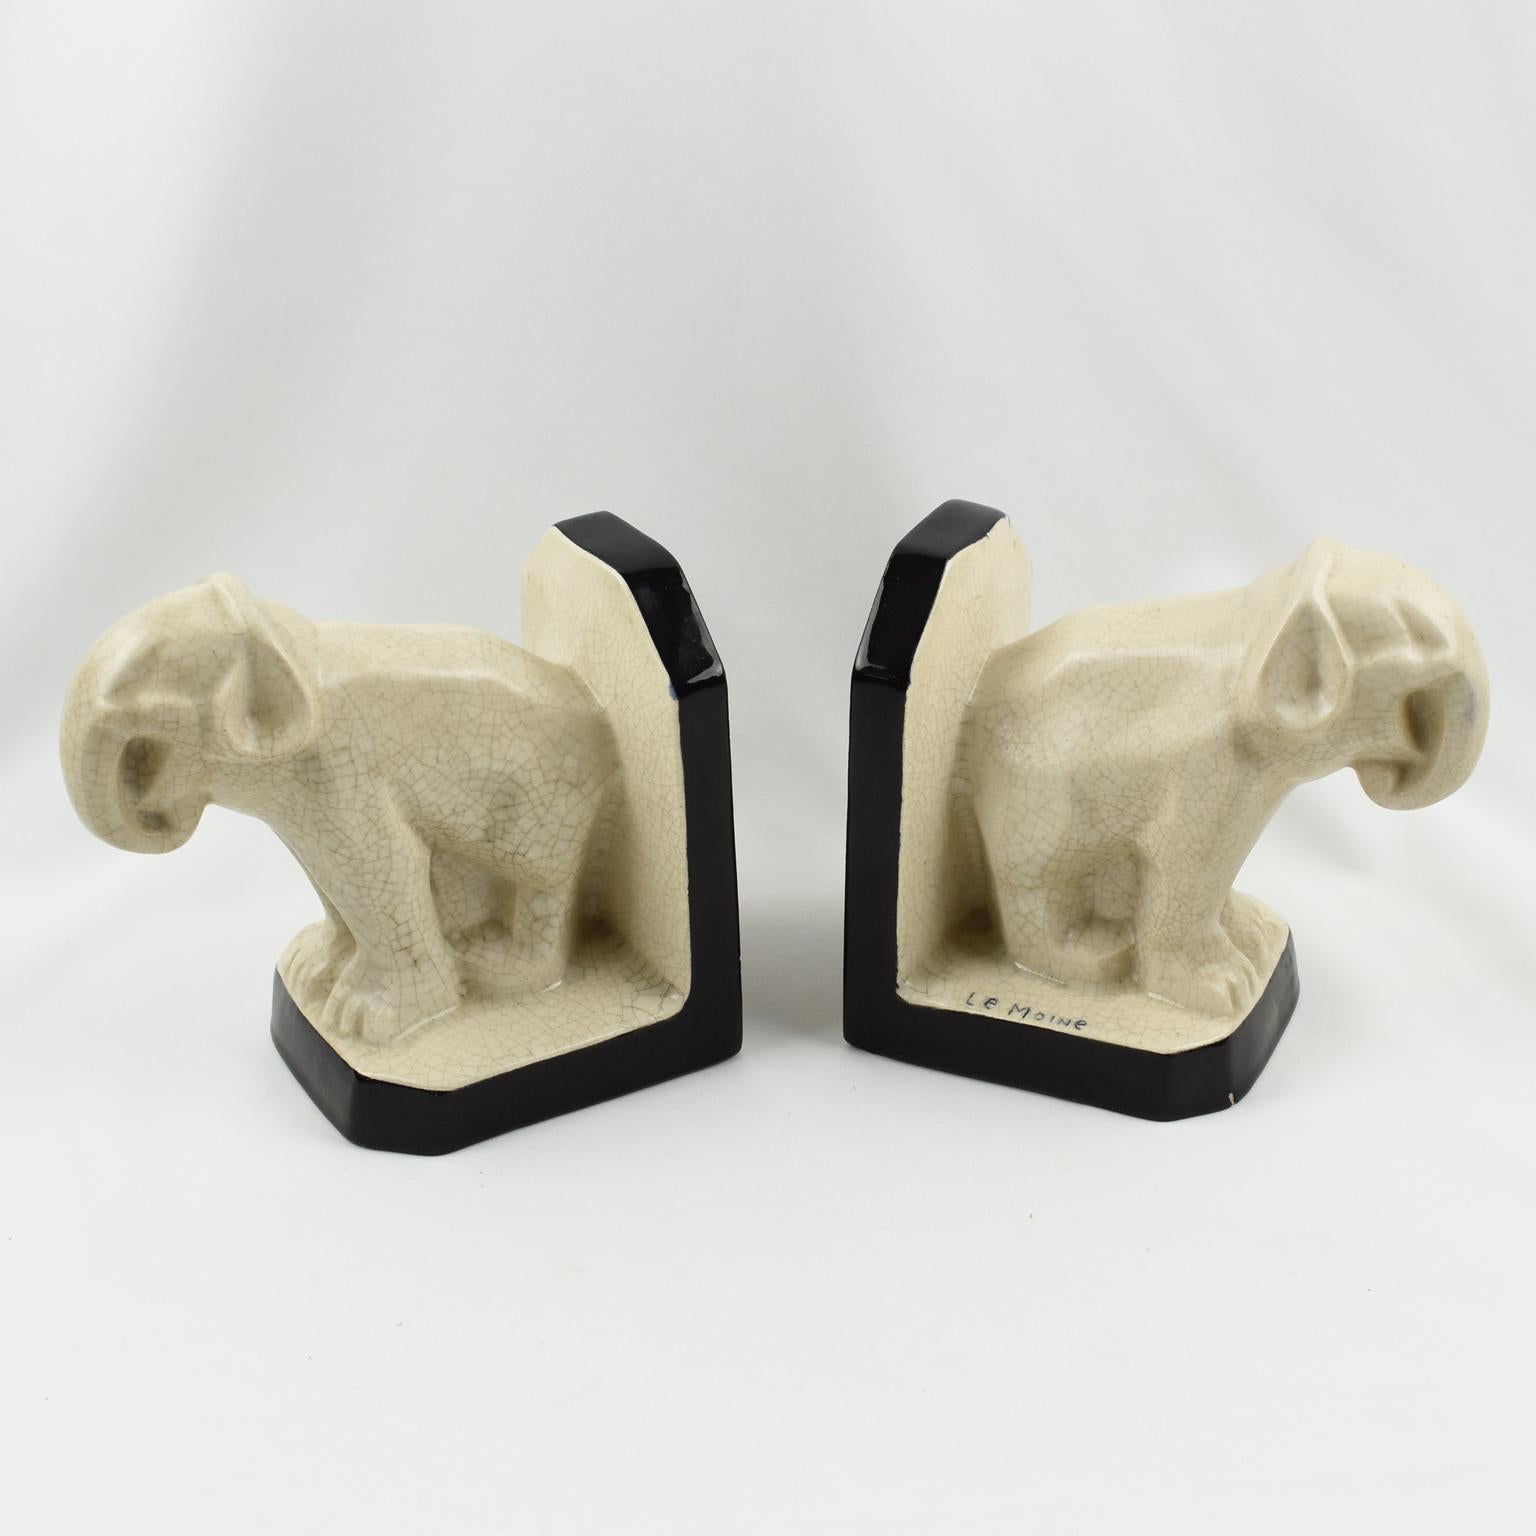 Early 20th Century Art Deco Crackle Ceramic Elephant Sculpture Bookends by Le Moine, France 1930s For Sale